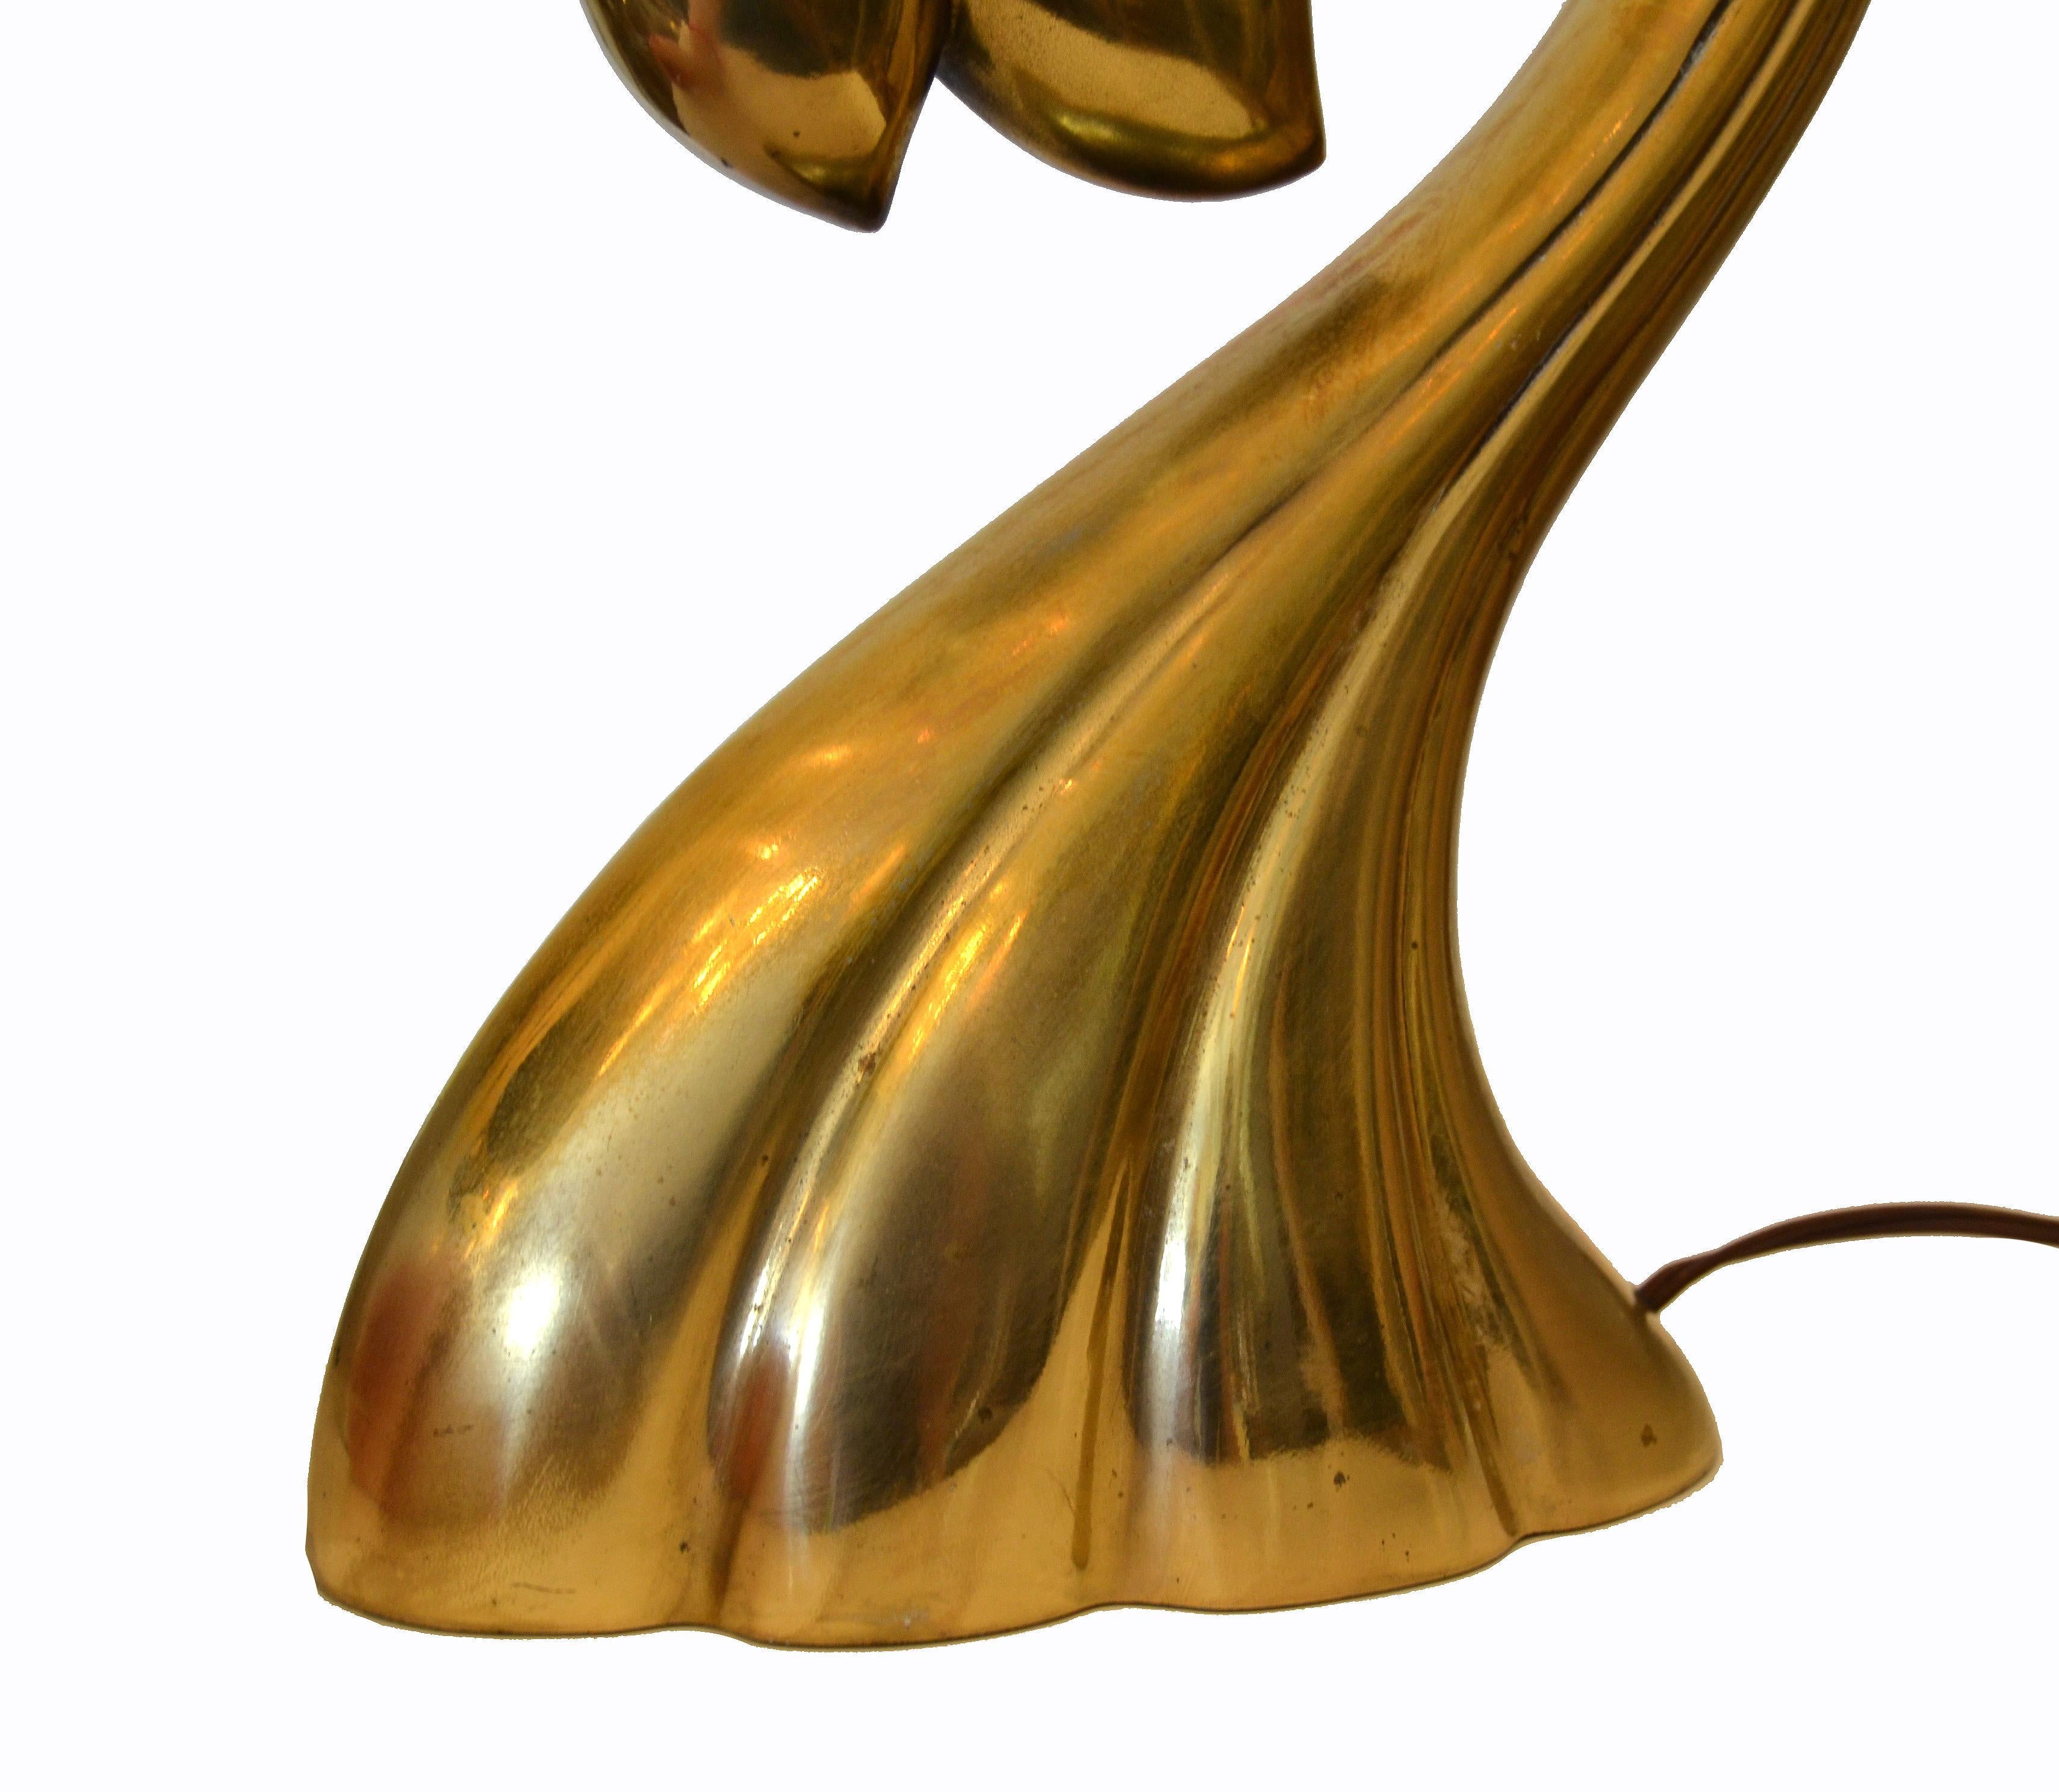 Pierre Cardin Manner Sculptural Brass Table Lamp Mid-Century Modern by Heyco In Good Condition For Sale In Miami, FL